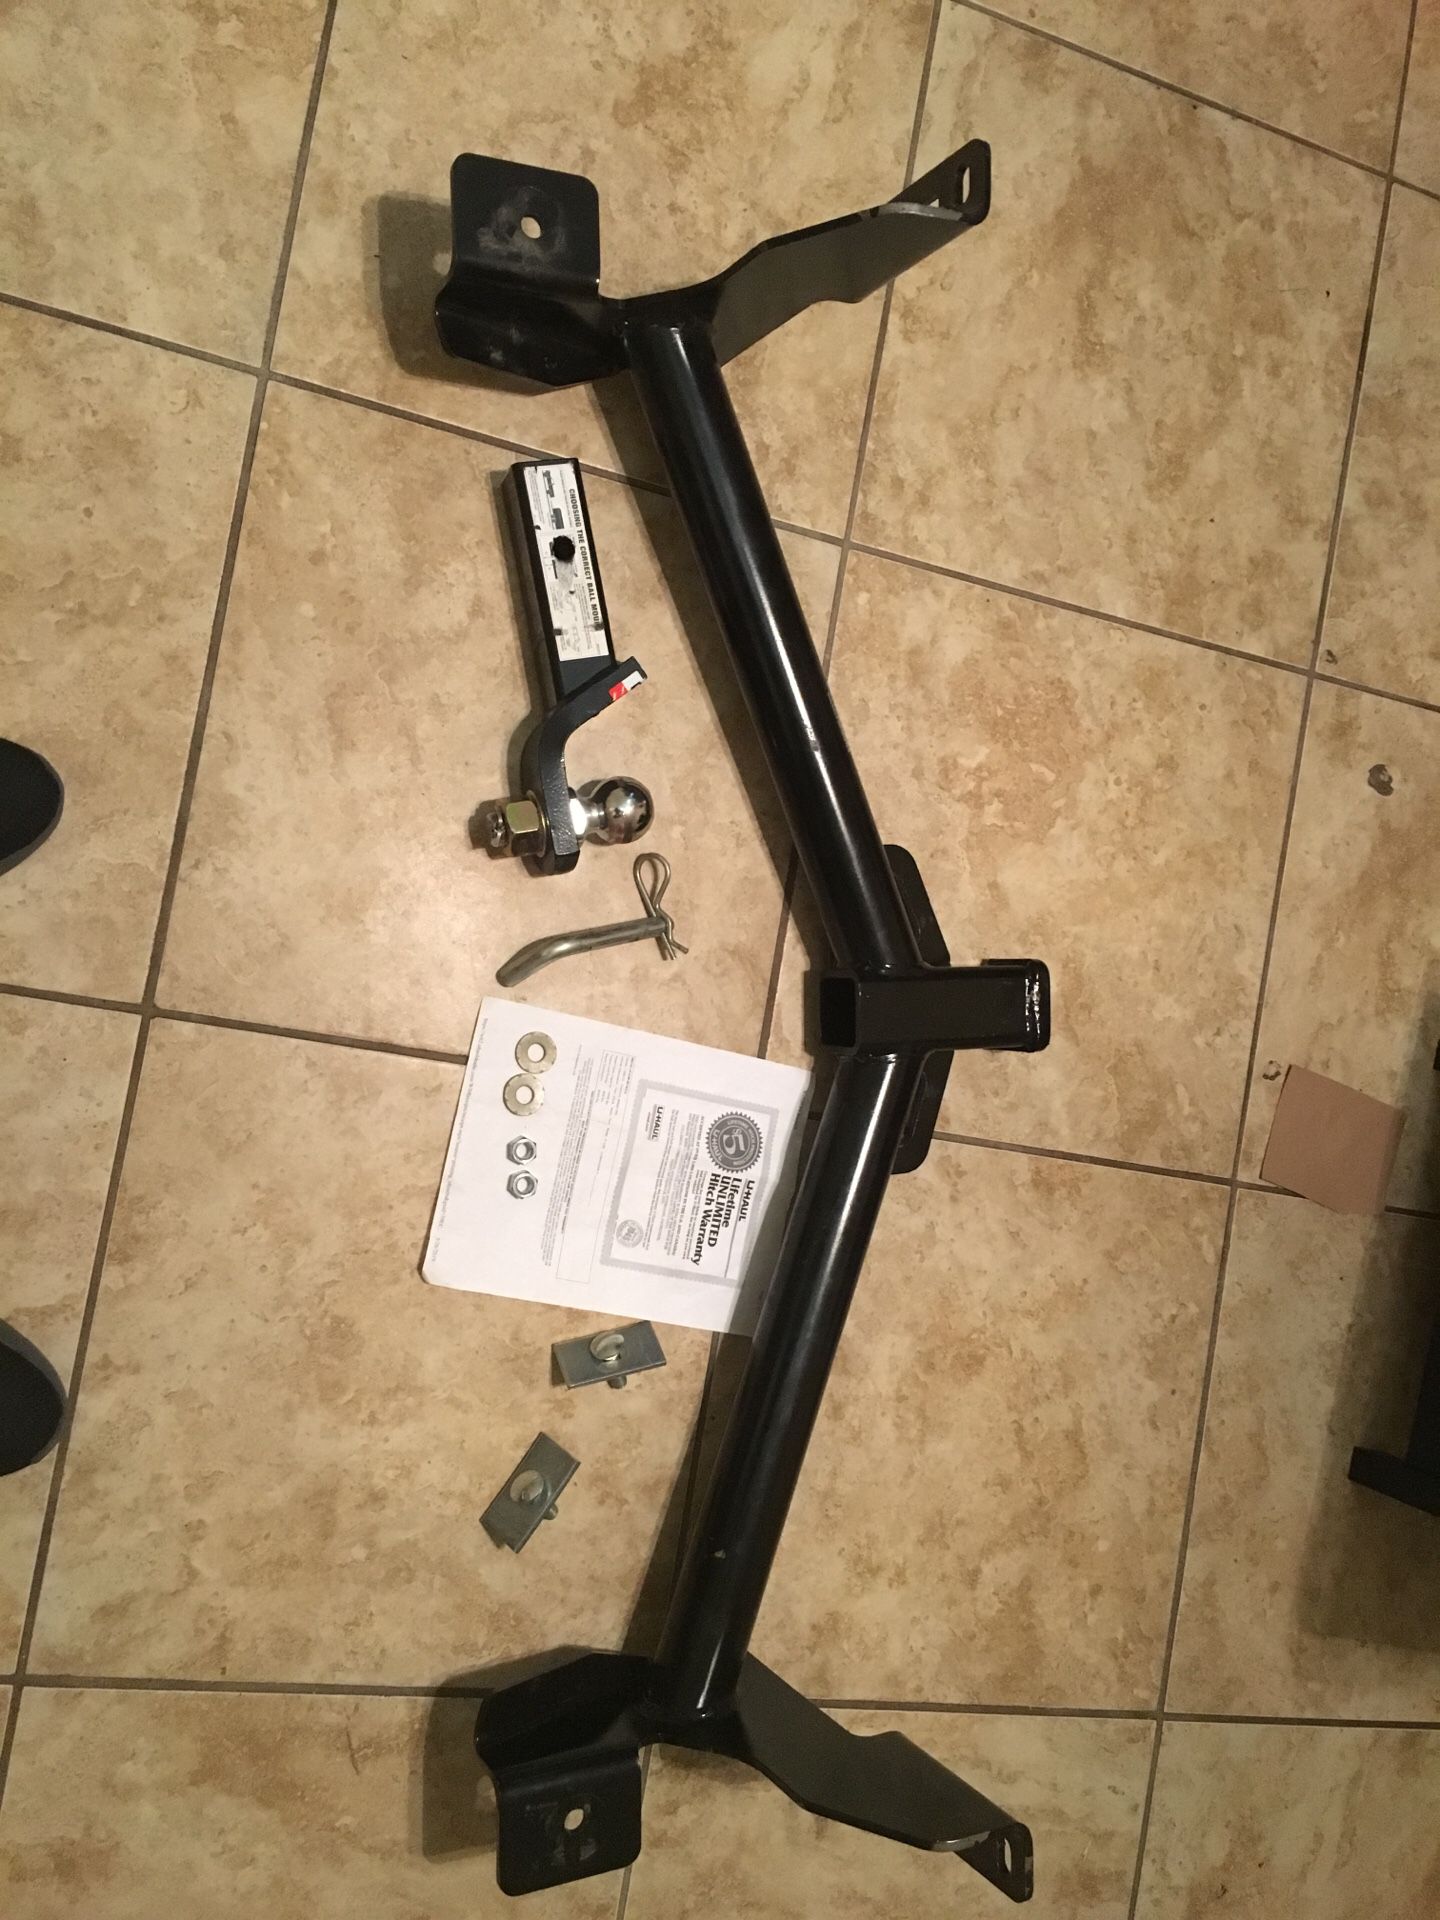 Complete Like-New U-Haul Trailer Hitch for Full Size Pickup Truck with possible Lifetime Unlimited Warranty